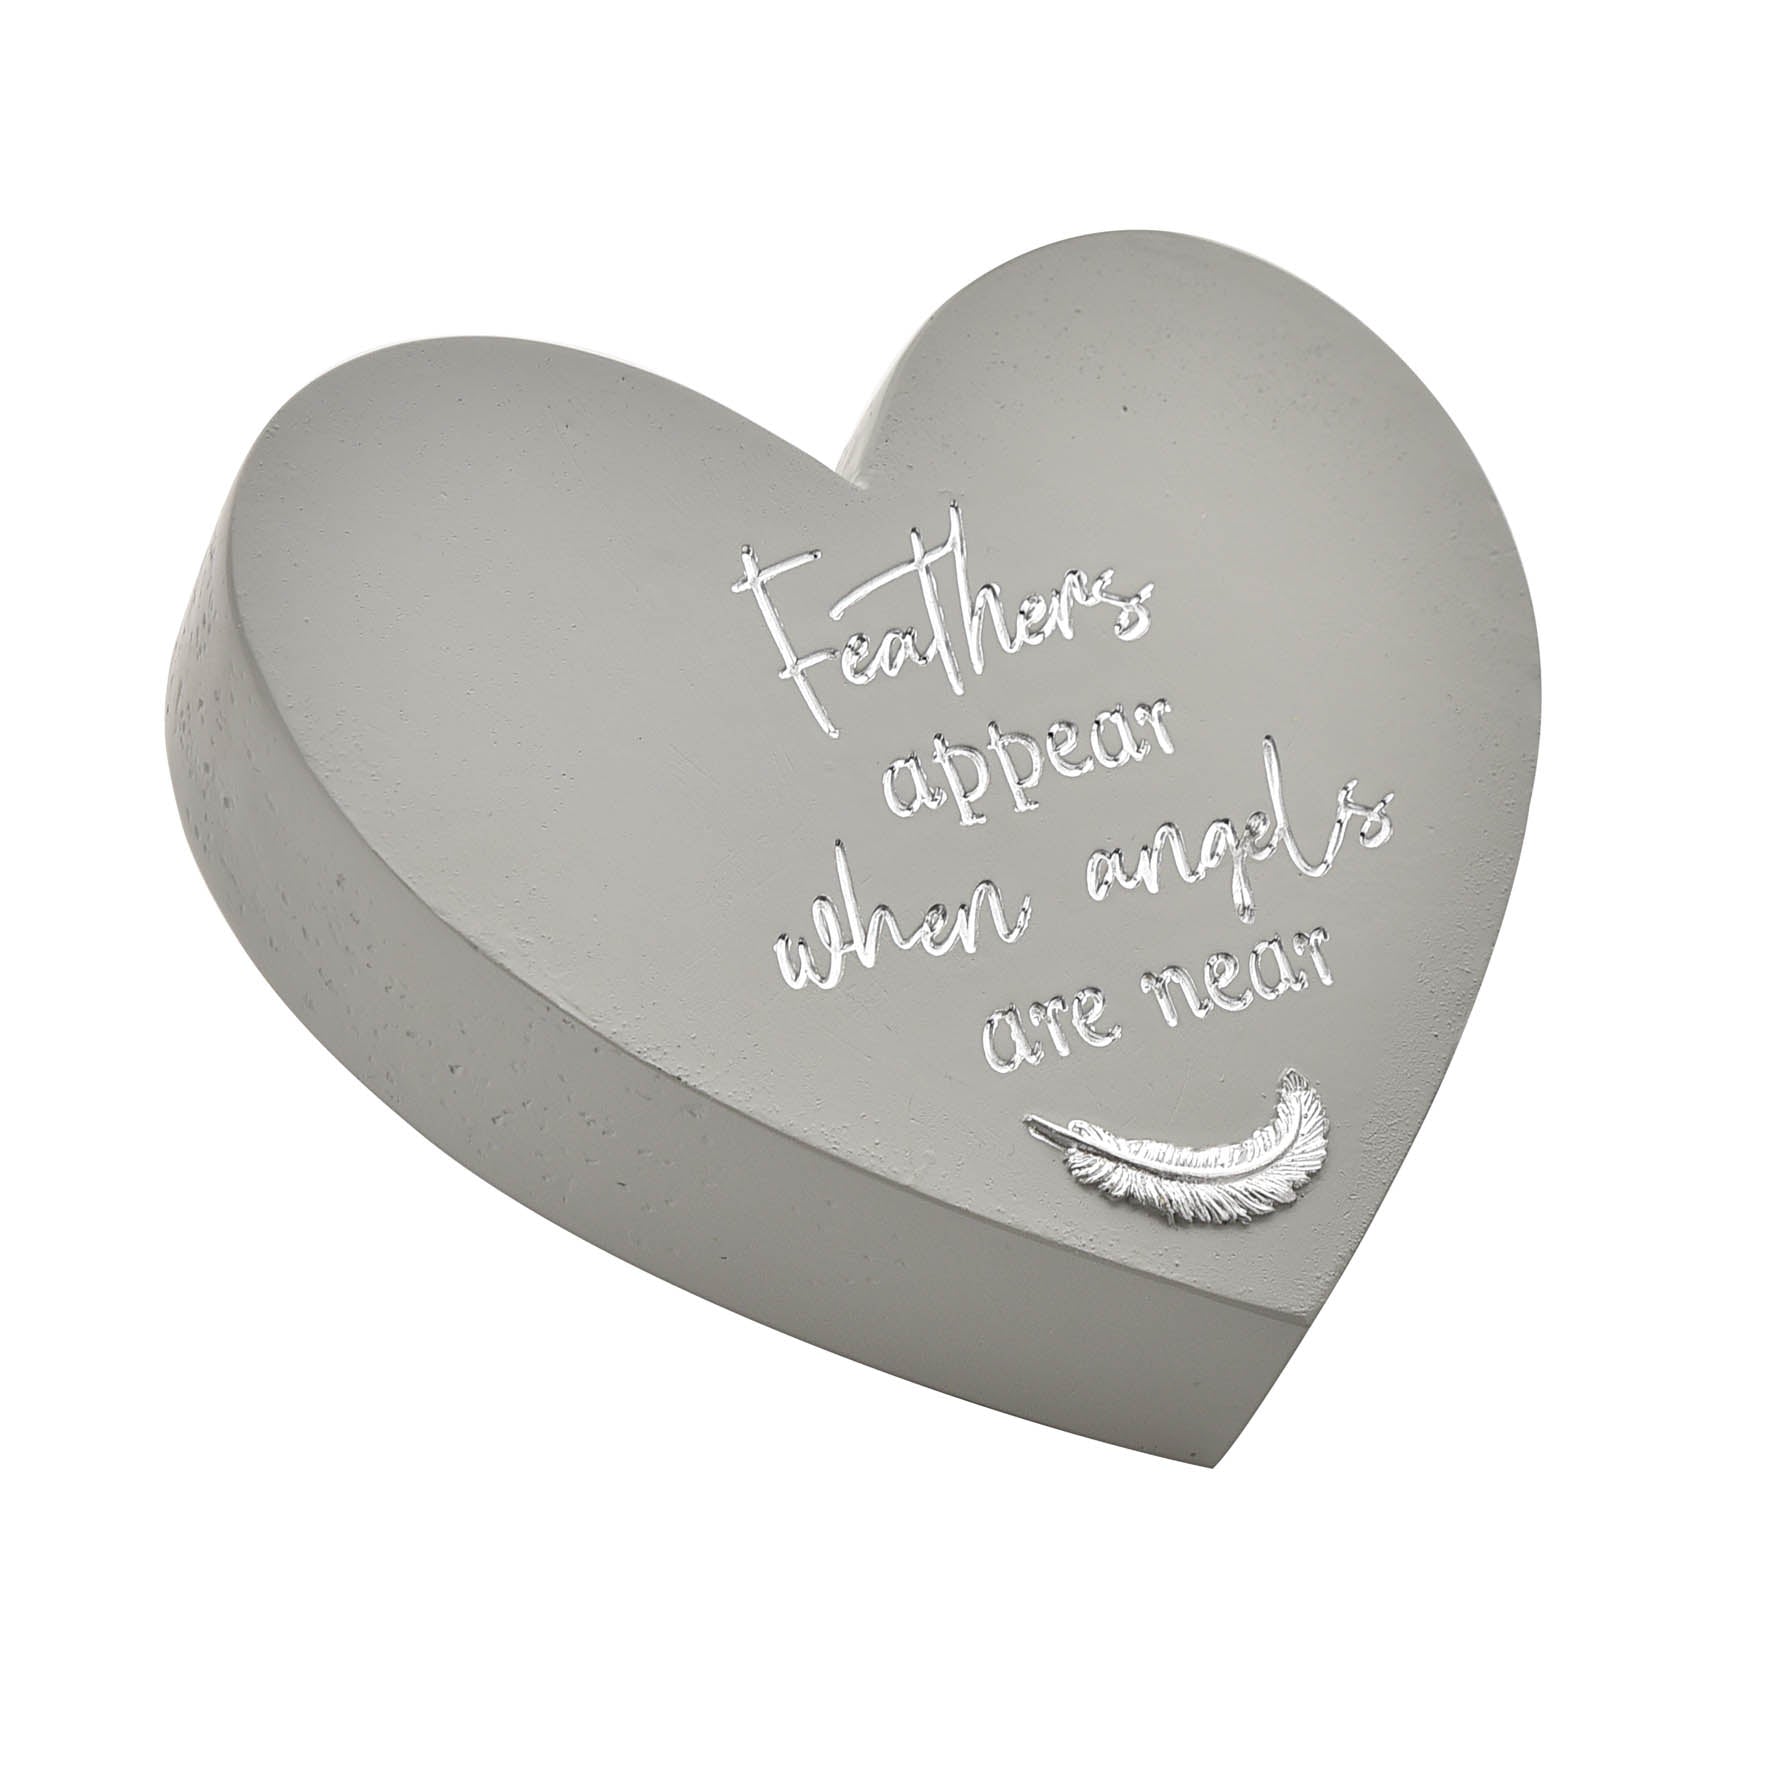 Thoughts of You Memorial Graveside Heart Plaque - Feathers